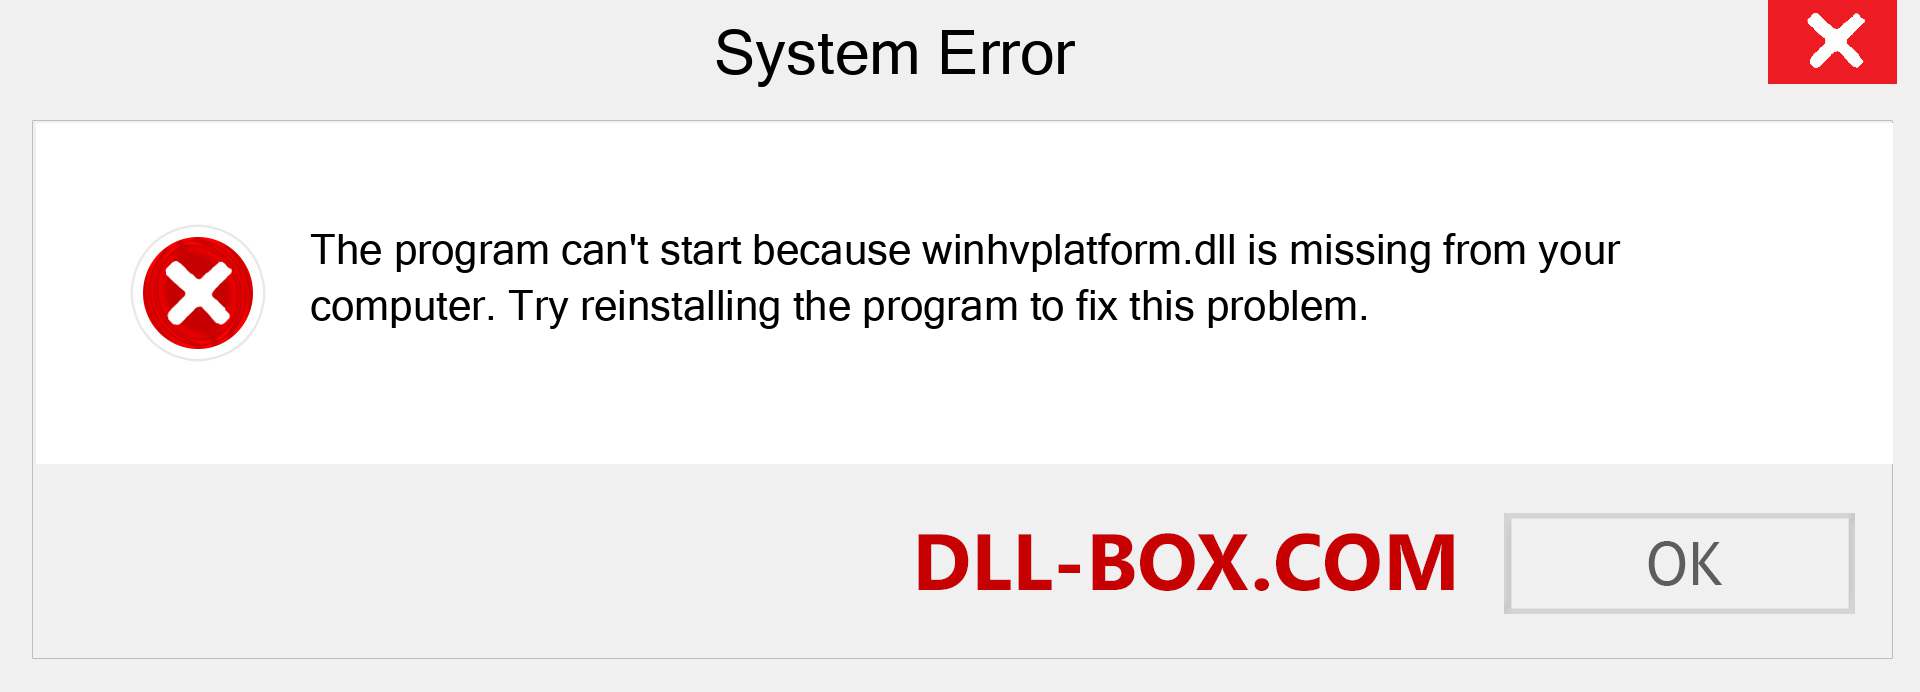  winhvplatform.dll file is missing?. Download for Windows 7, 8, 10 - Fix  winhvplatform dll Missing Error on Windows, photos, images